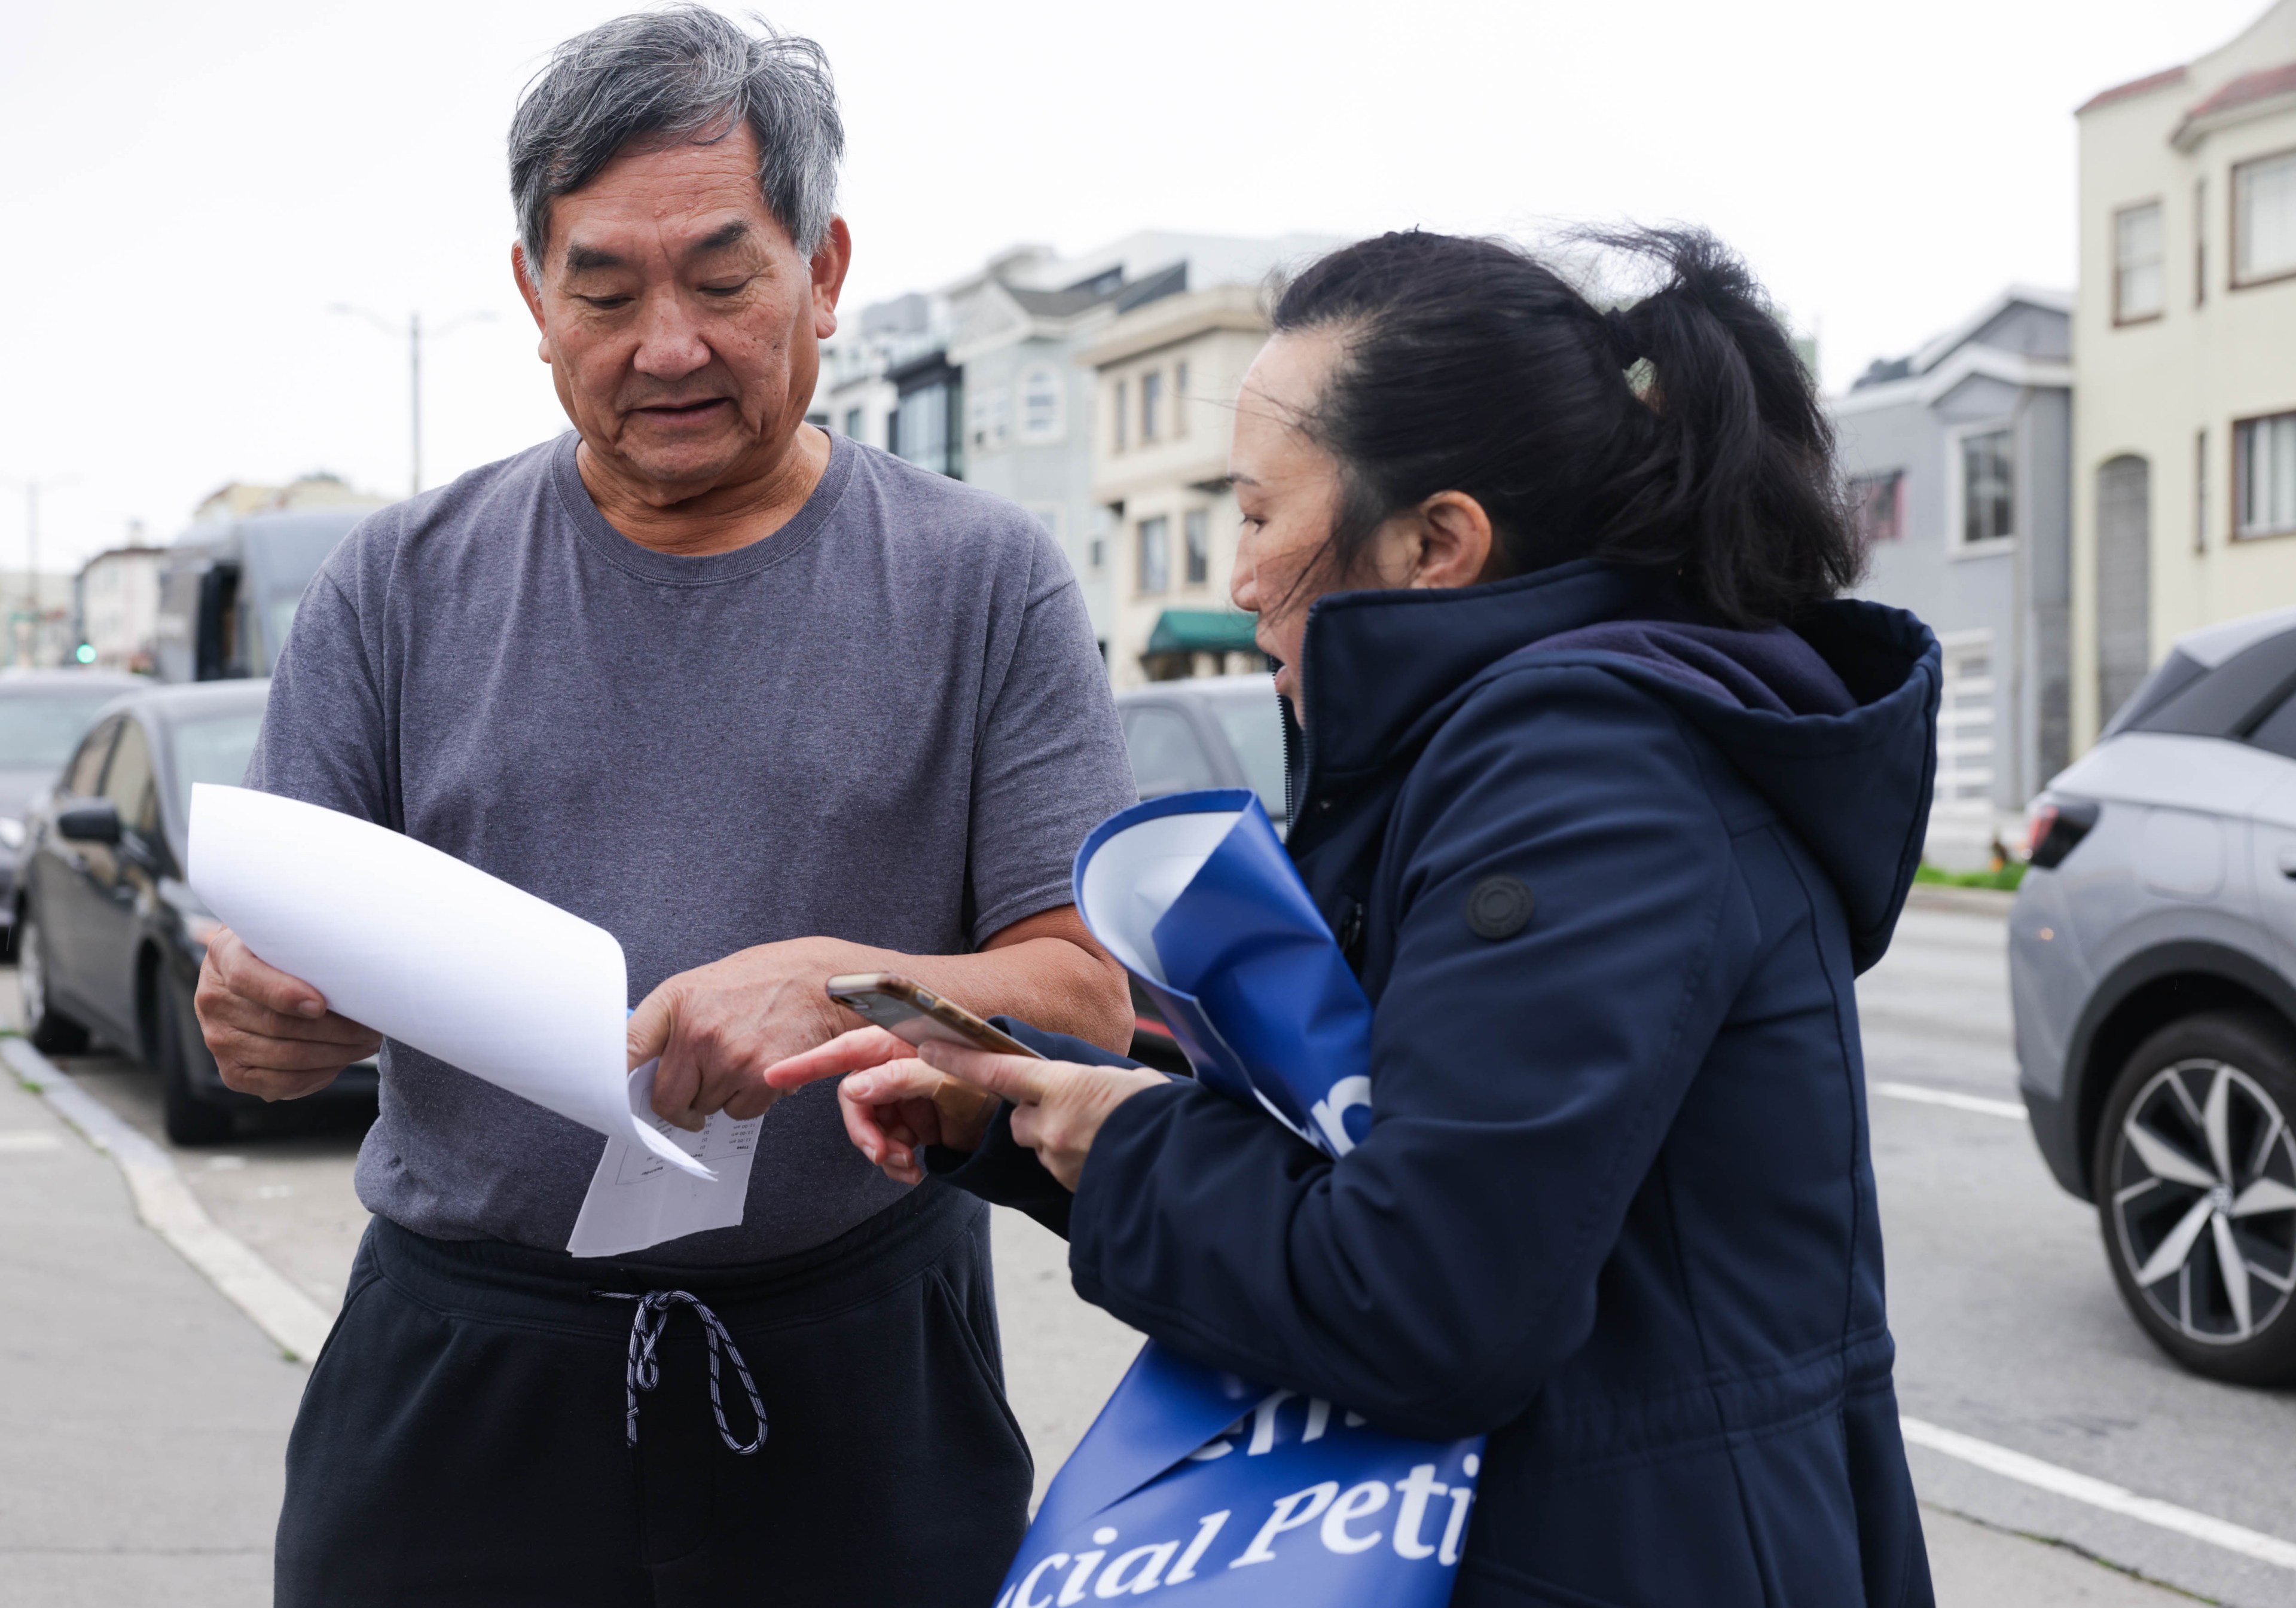 A volunteer helps a man sign a petition on Taraval Street in San Francisco.